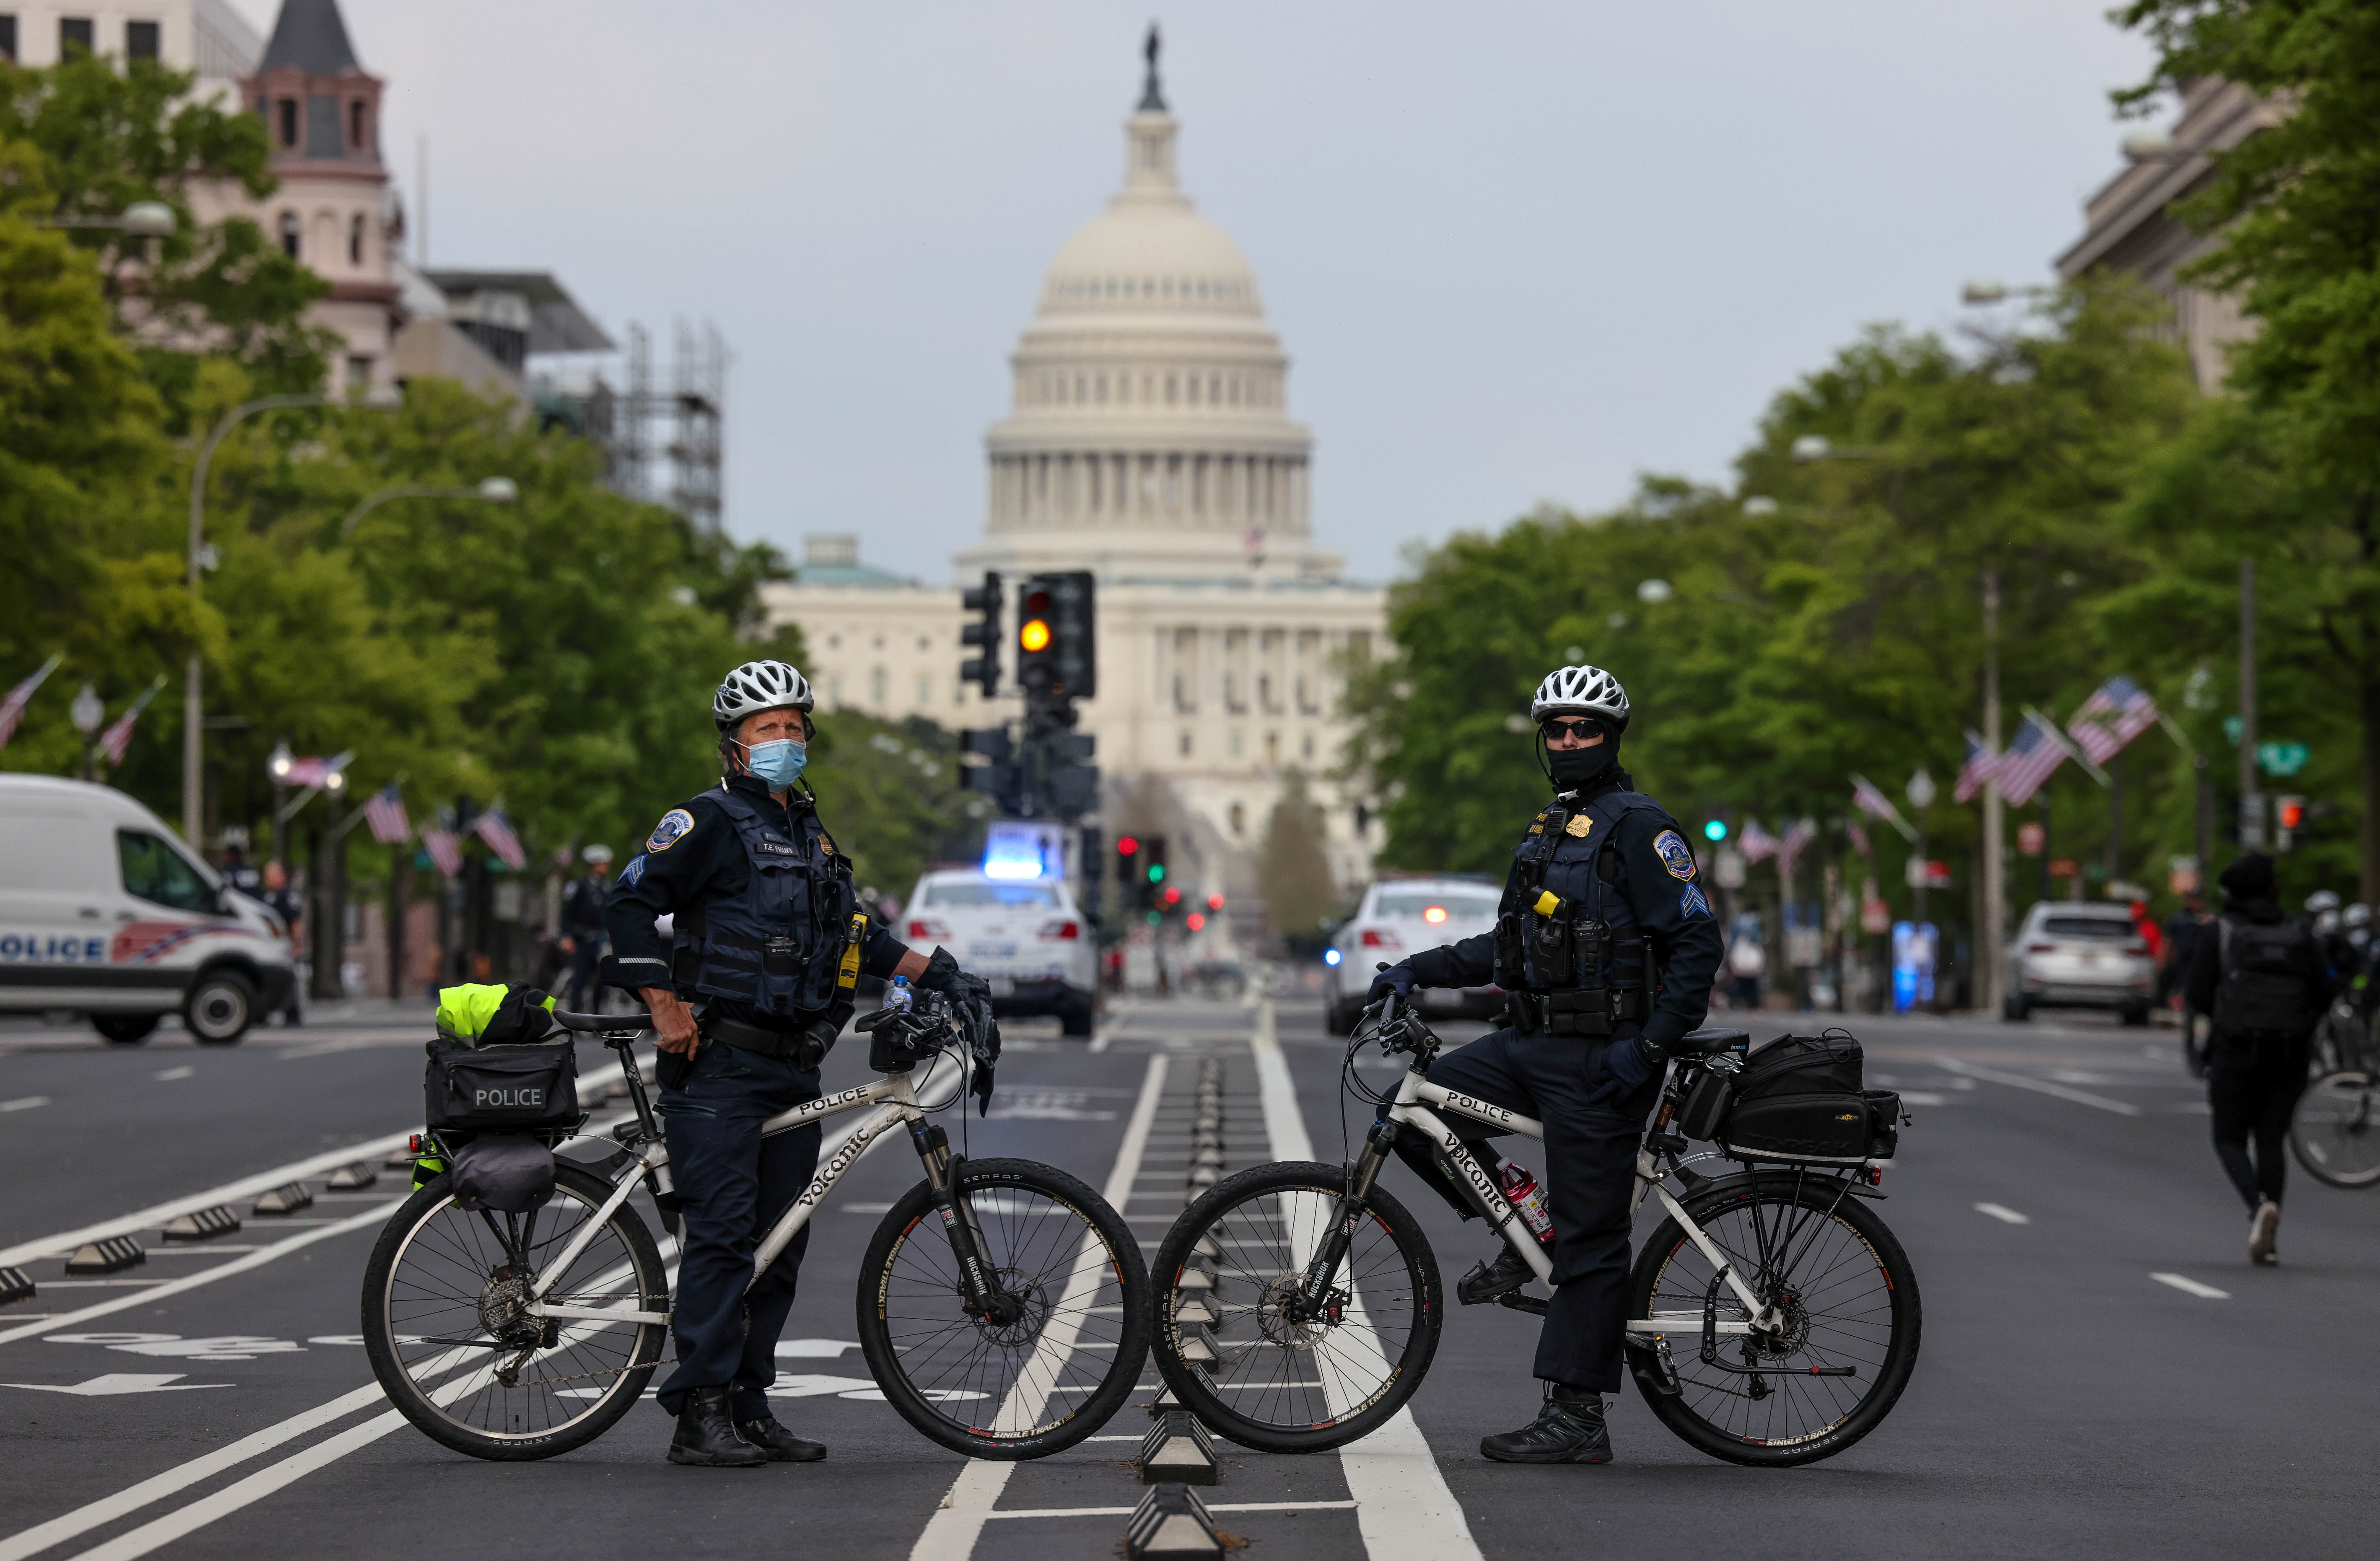 Demonstrations for racial equality and police reforms in Washington, D.C